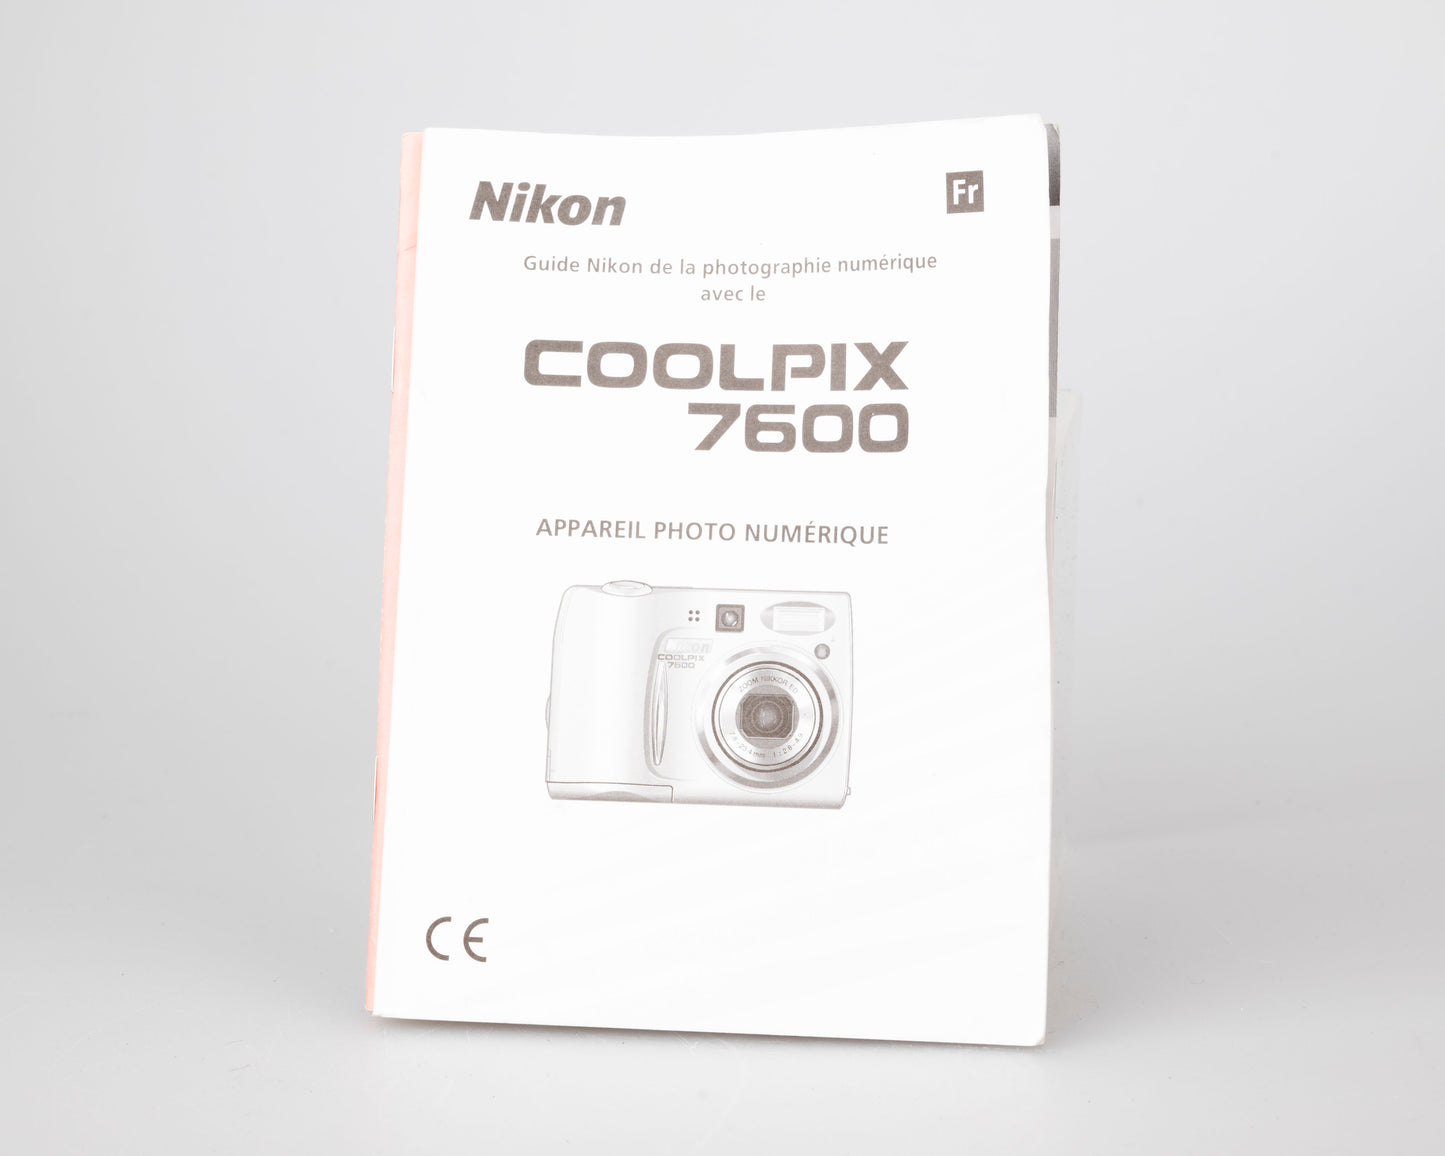 Nikon Coolpix 7600 7MP CCD sensor digicam w/ battery charger + manual in French (uses AA batteries)